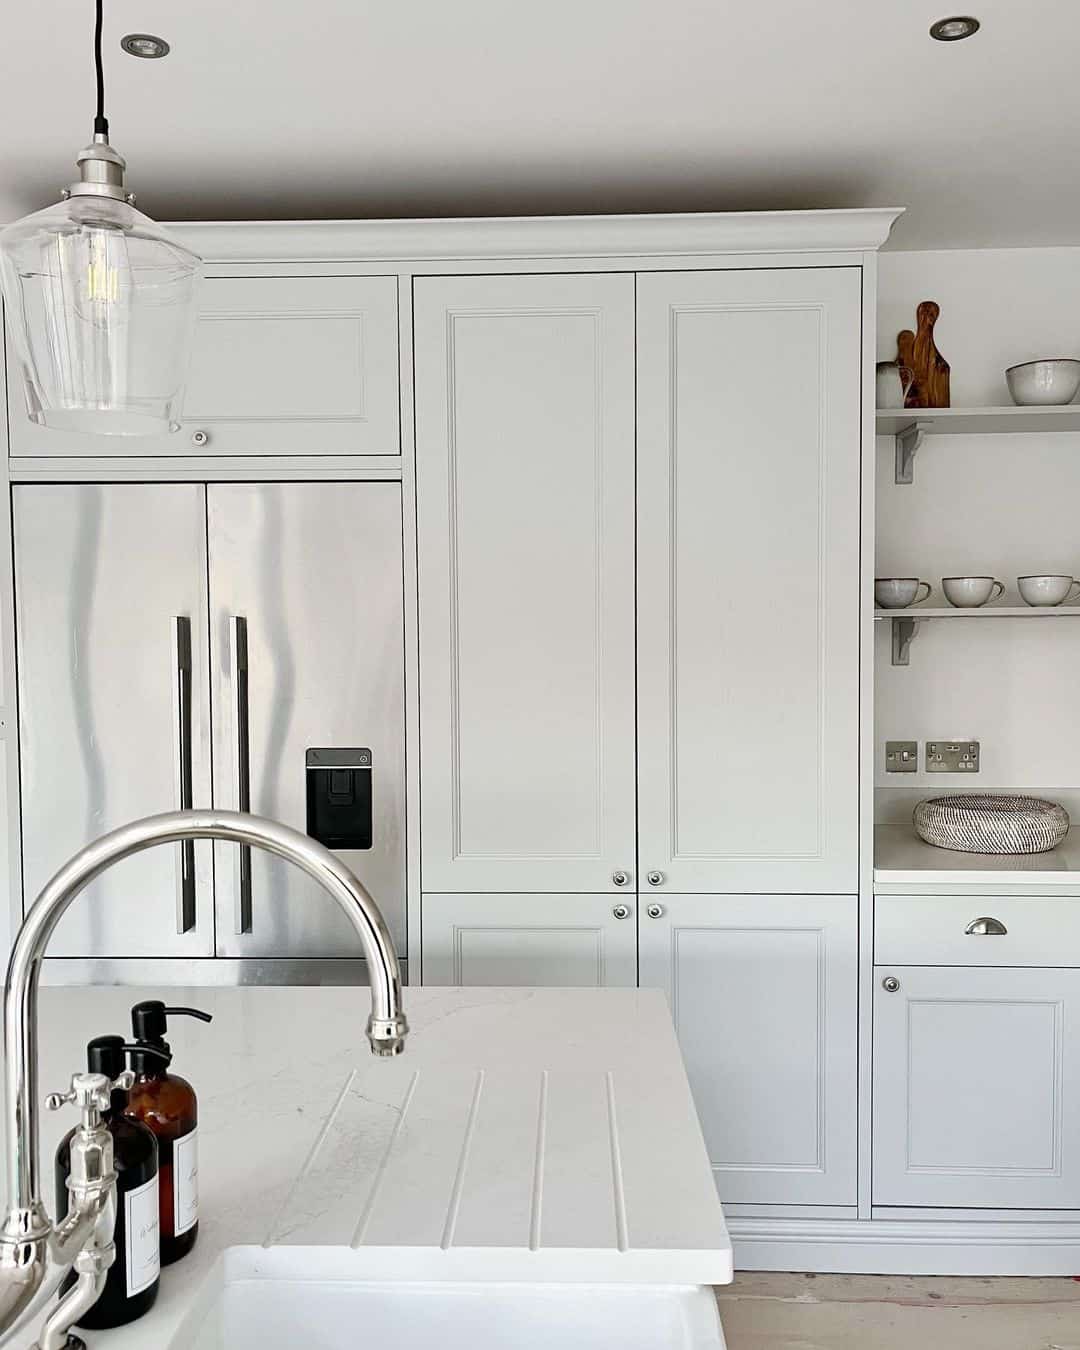 29 Surprising Kitchen Cabinet Ideas You Need To See